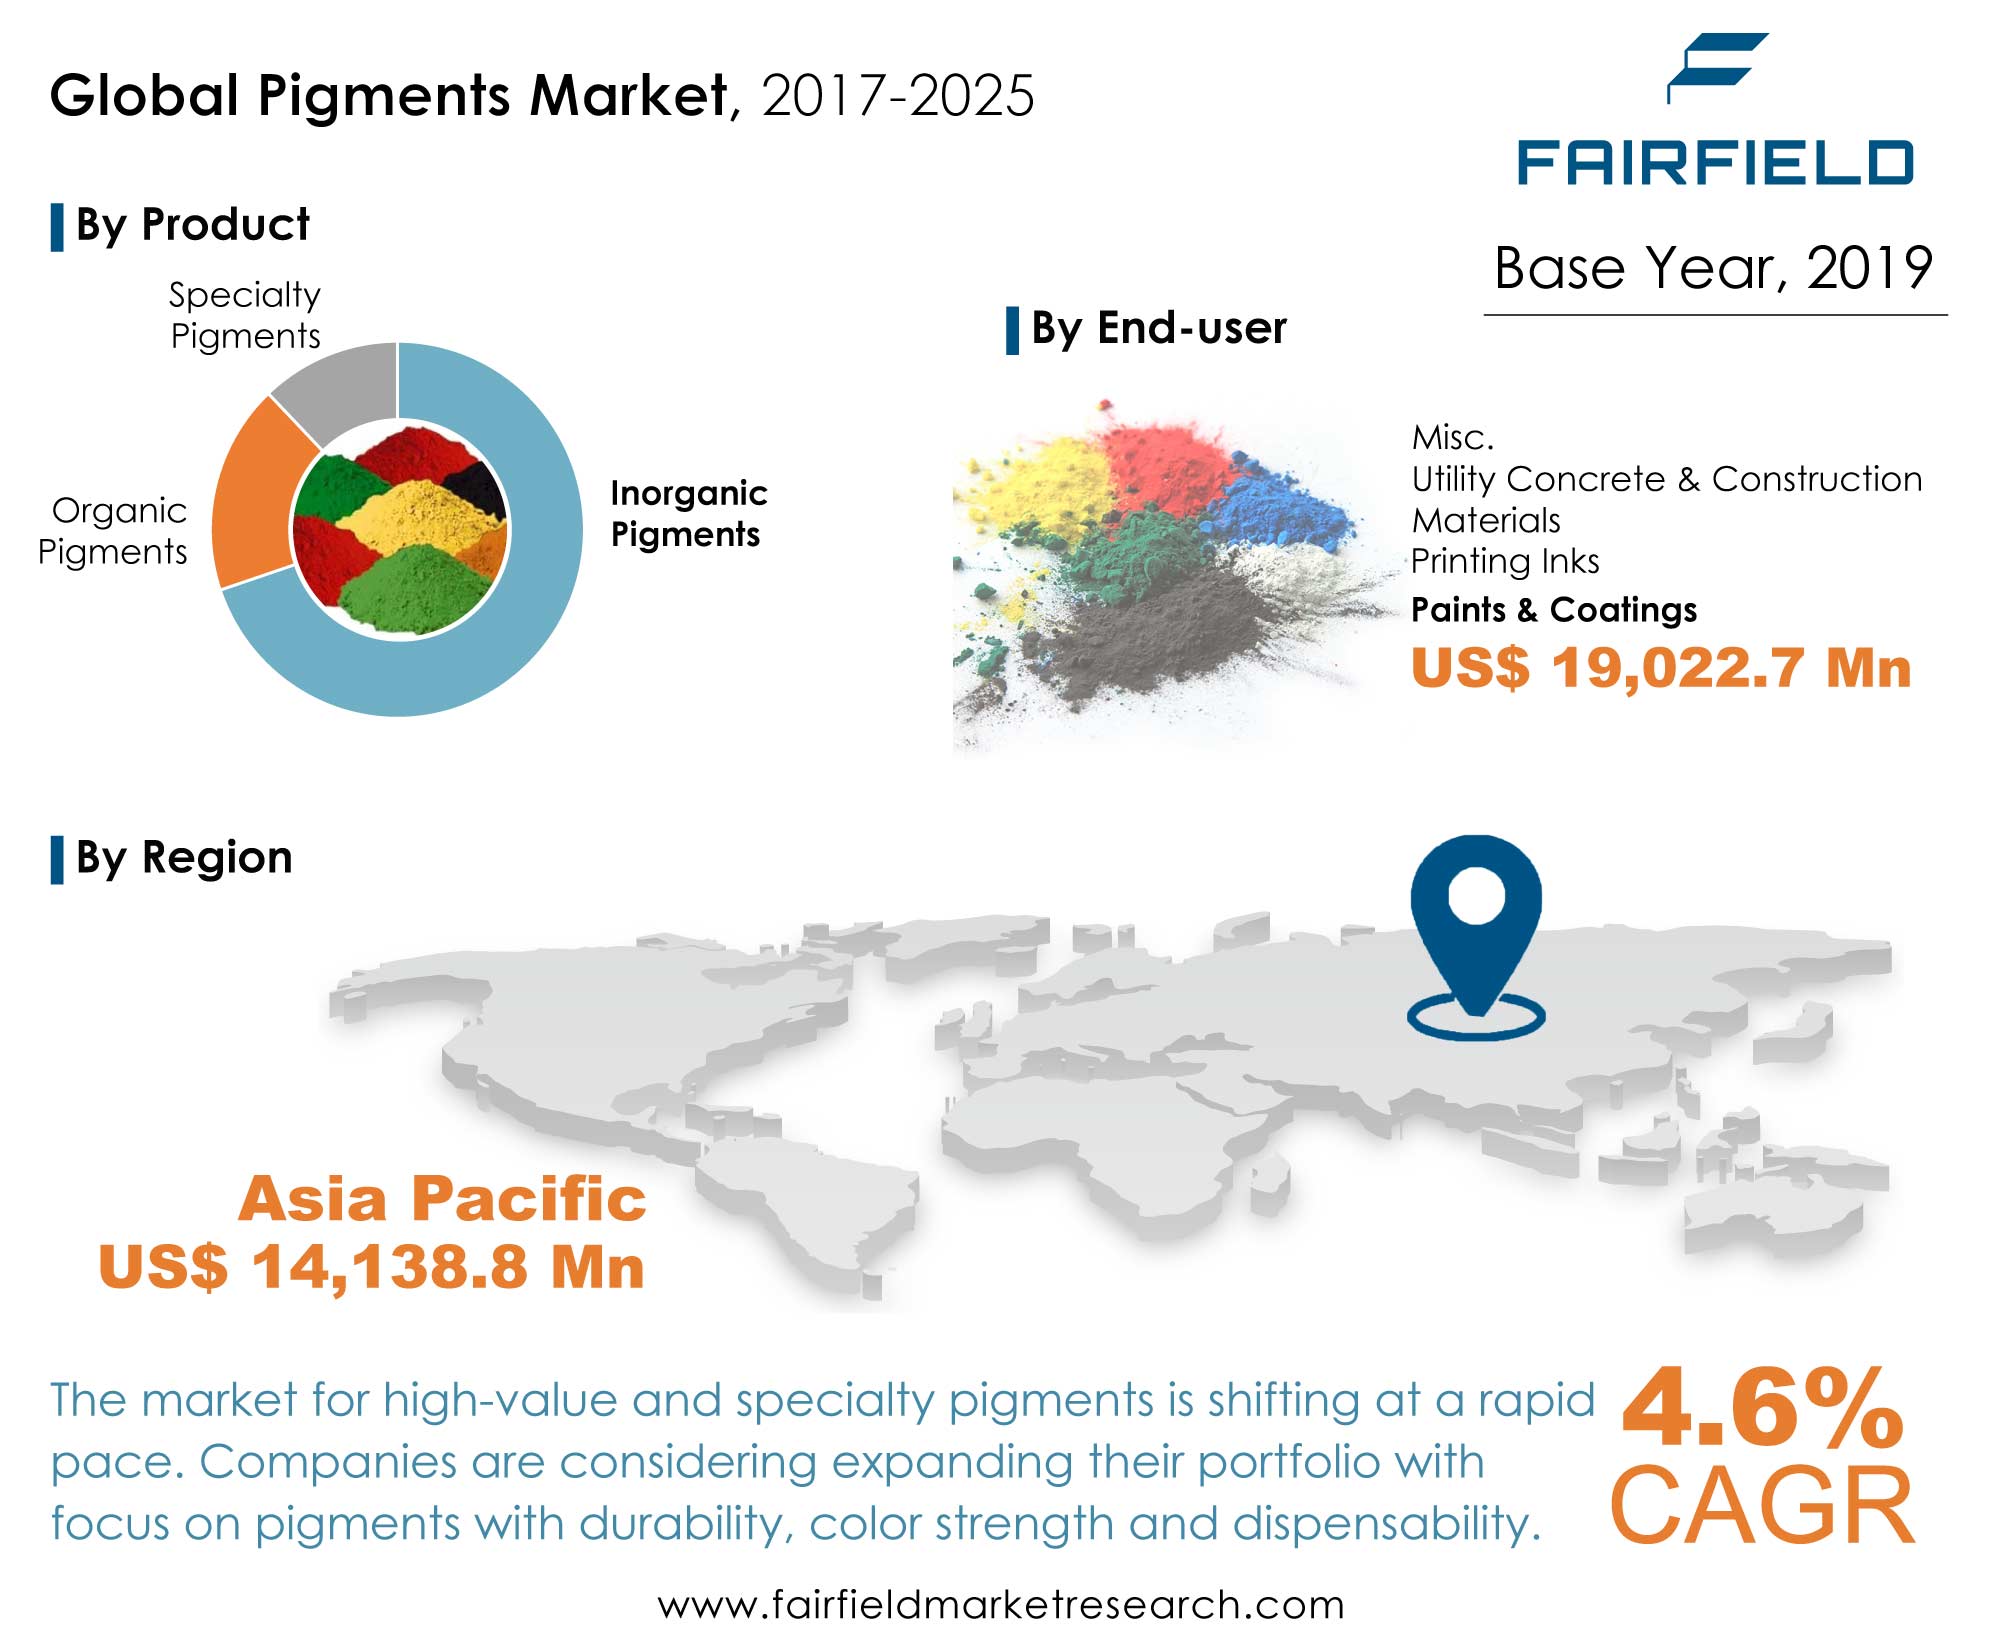 Global Pigments Market, 2017-2025 =
FAIRFIELD
| By Product
Base Year, 2019

Specialty
Pigments

= «

| By End-user

  

Misc.

Utility Concrete & Construction
Materials

Printing Inks

Paints & Coatings

US$ 19,022.7 Mn

  

Inorganic

Organic Pigments

Pigments

 

| By Region

Asia Pacific
US$ 14,138.8 Mn

The market for high-value and specialty pigments is shifting at a rapid 4.6%

pace. Companies are considering expanding their portfolio with
focus on pigments with durability, color strength and dispensability. CAG R

www fairfieldmarketresearch.com